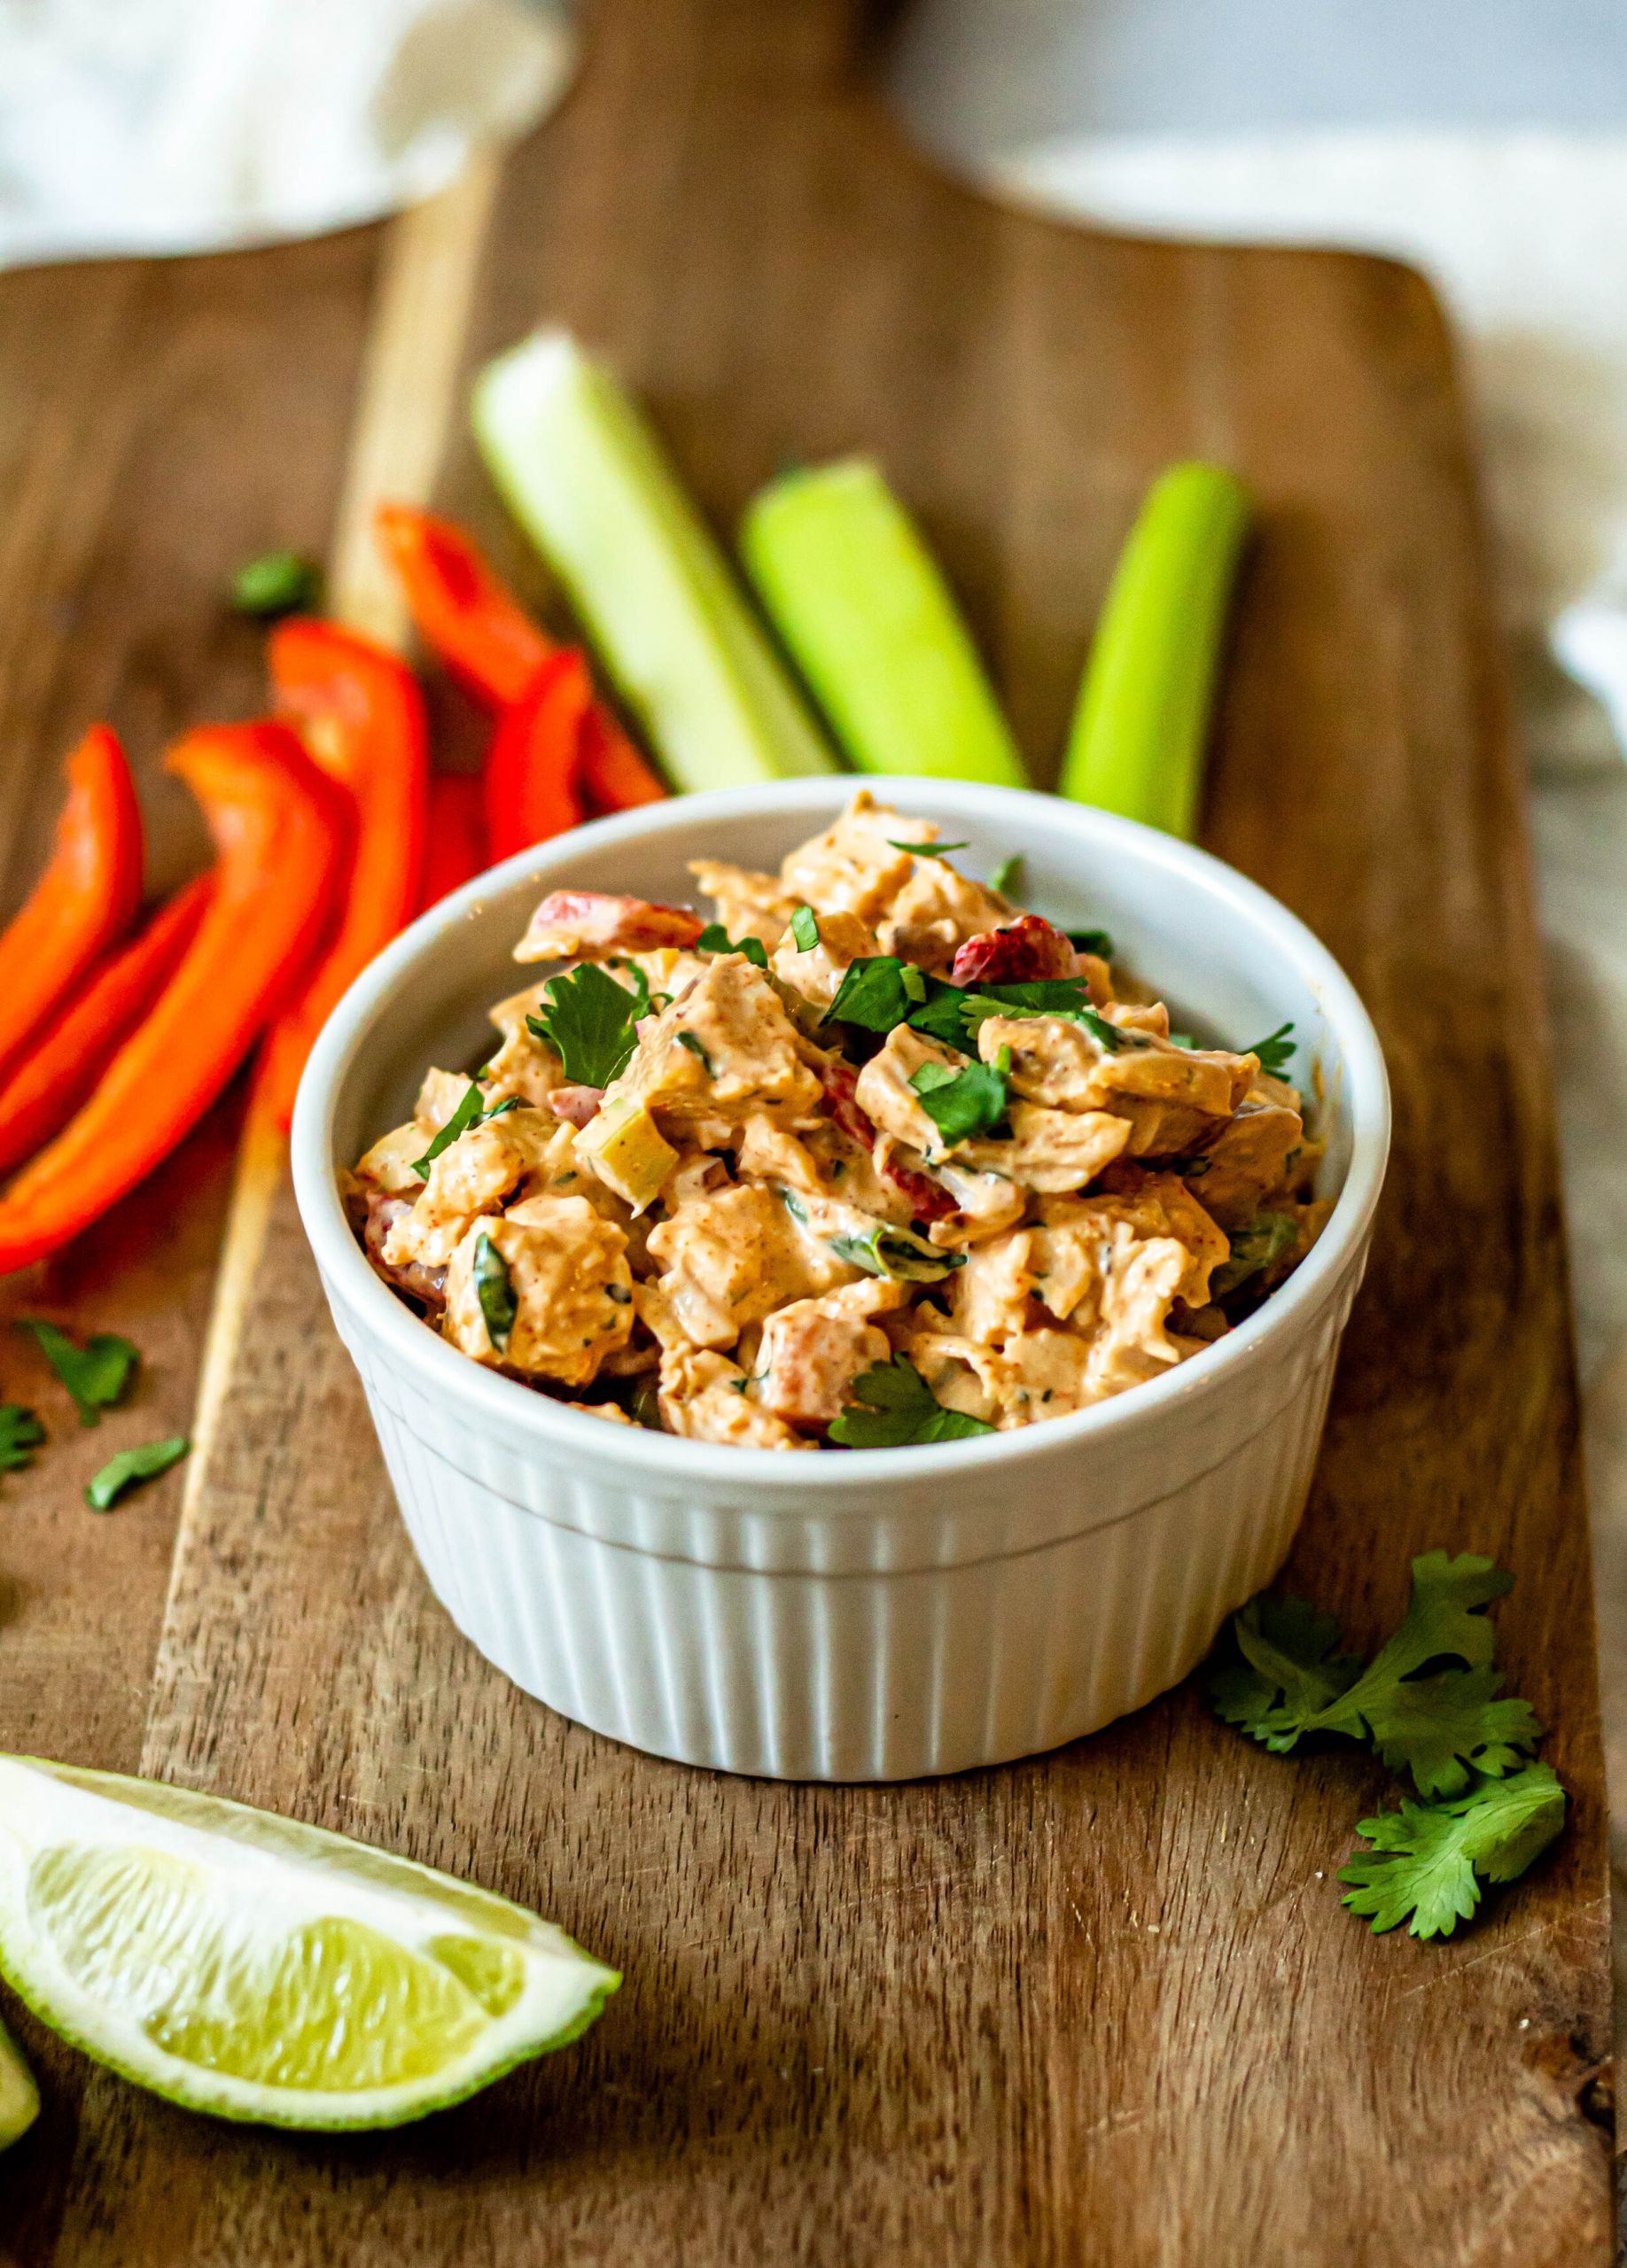 15 Recipes for Great Chipotle Chicken Salad